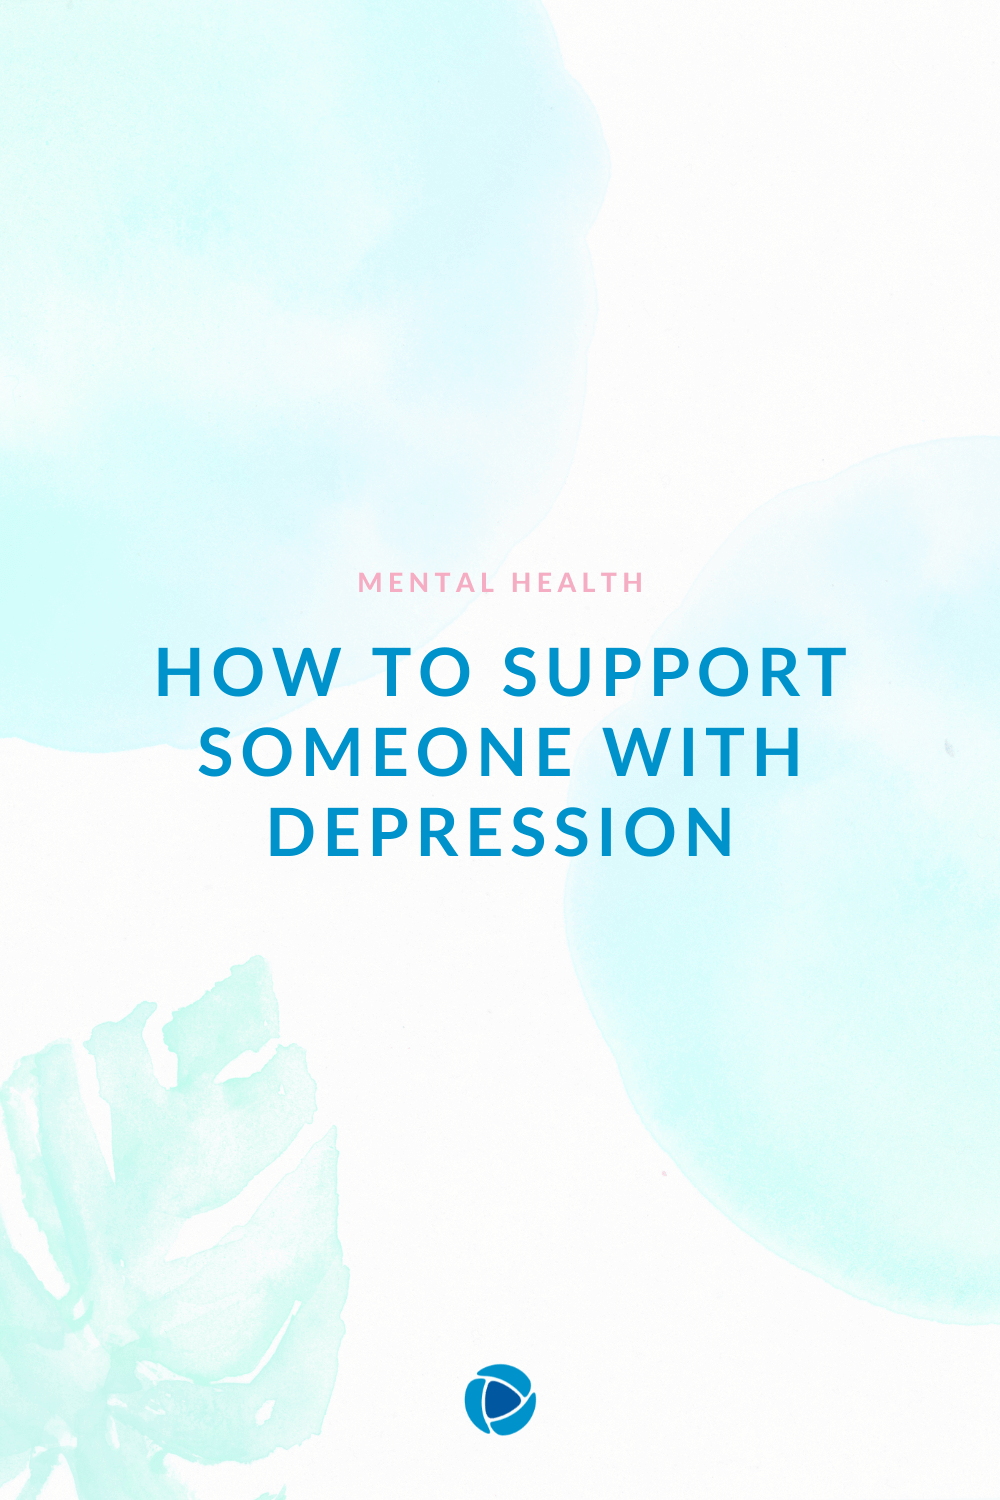 How to Support Someone with Depression